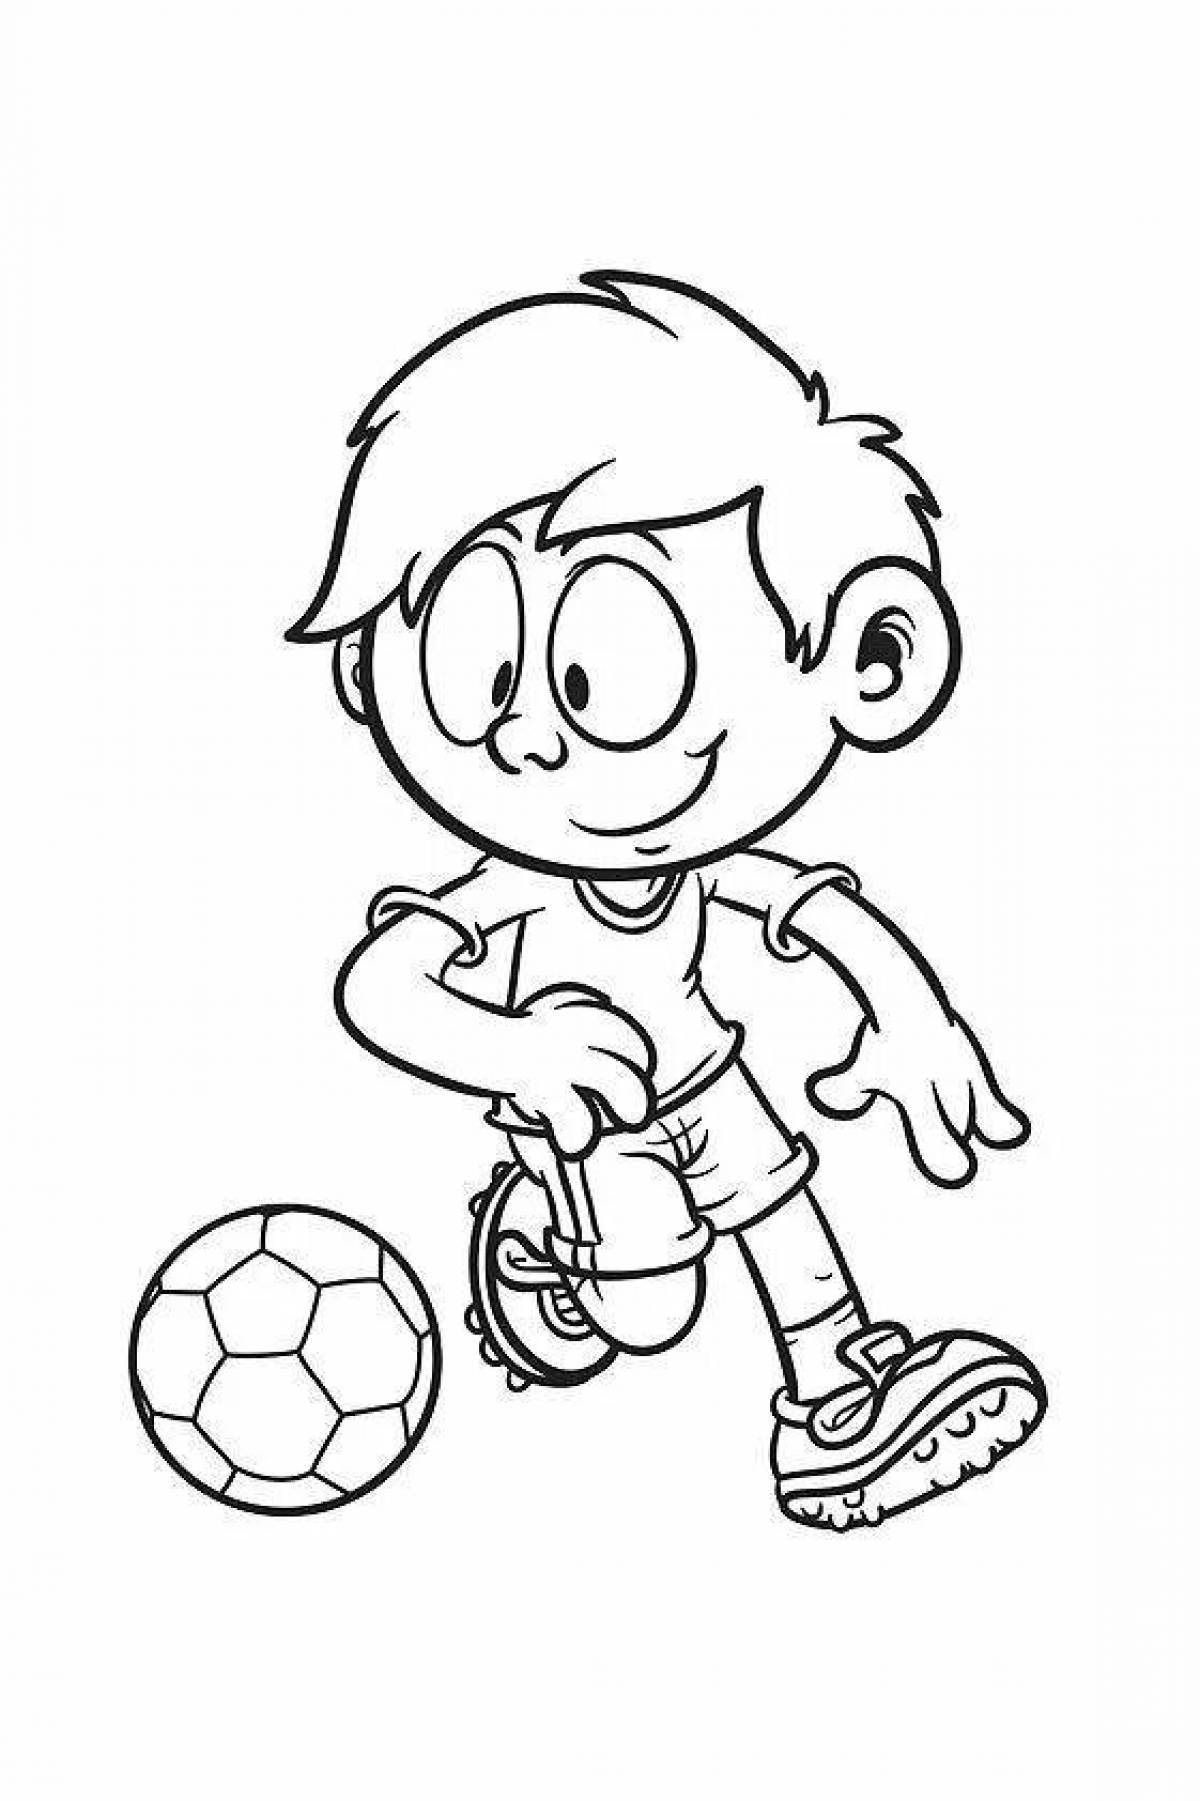 Coloring page brave boy football player